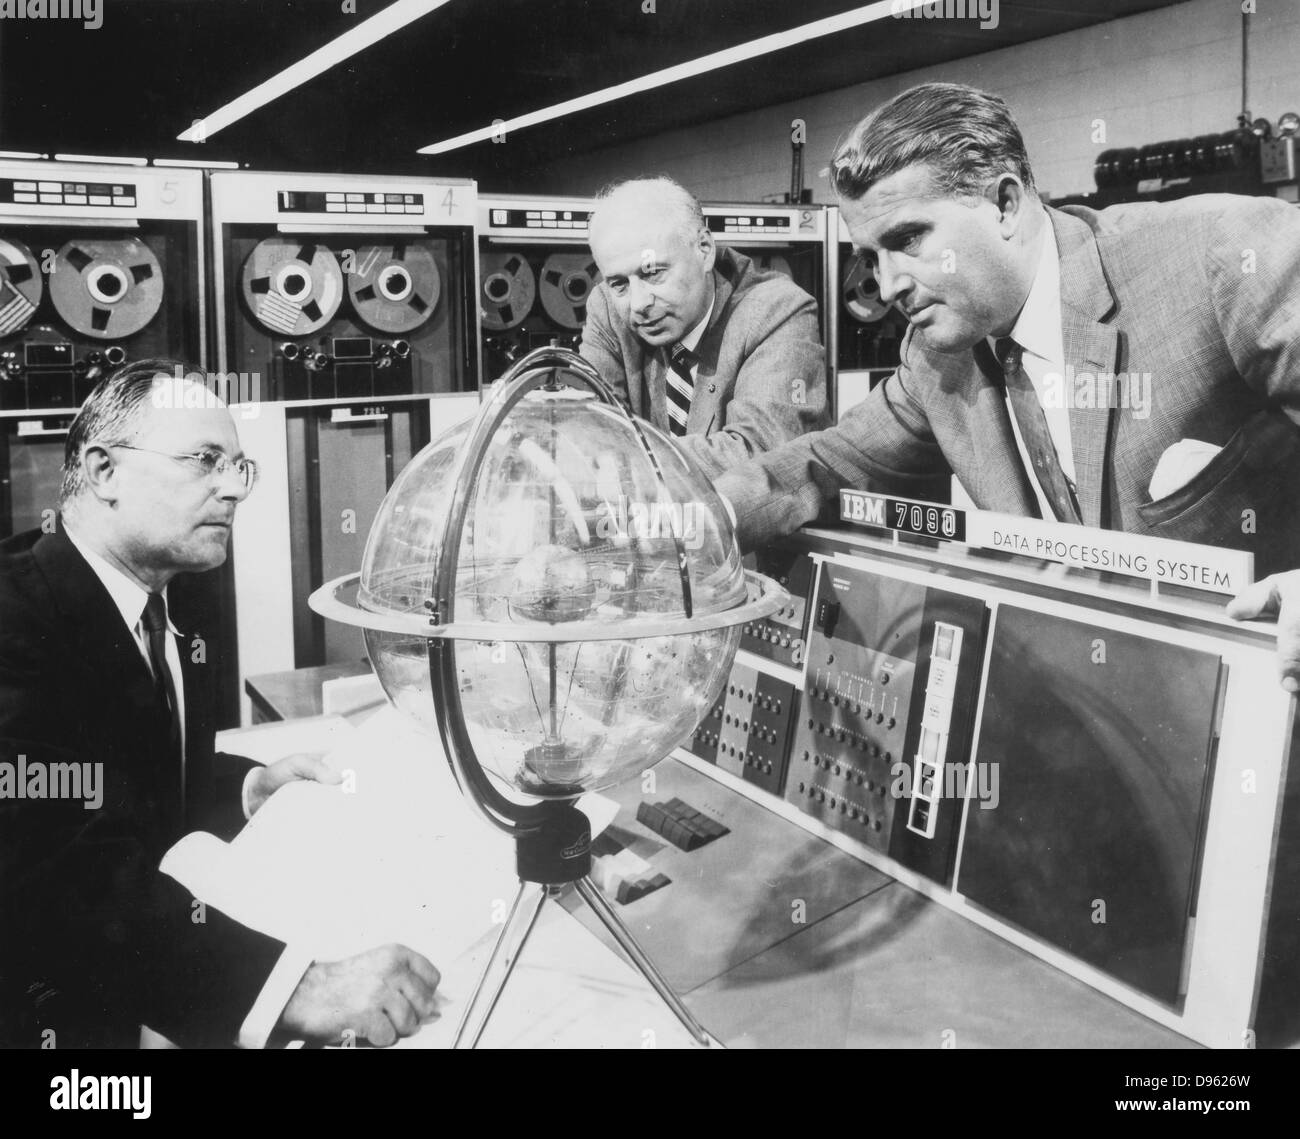 Werner Magnus Maximilian Freihier von Braun (1912-1977) German scientist involved in his country's rocket programme.  After the Second World War he took US nationality.  He became Director of NASA and is regarded as the father of the US space programme. Stock Photo